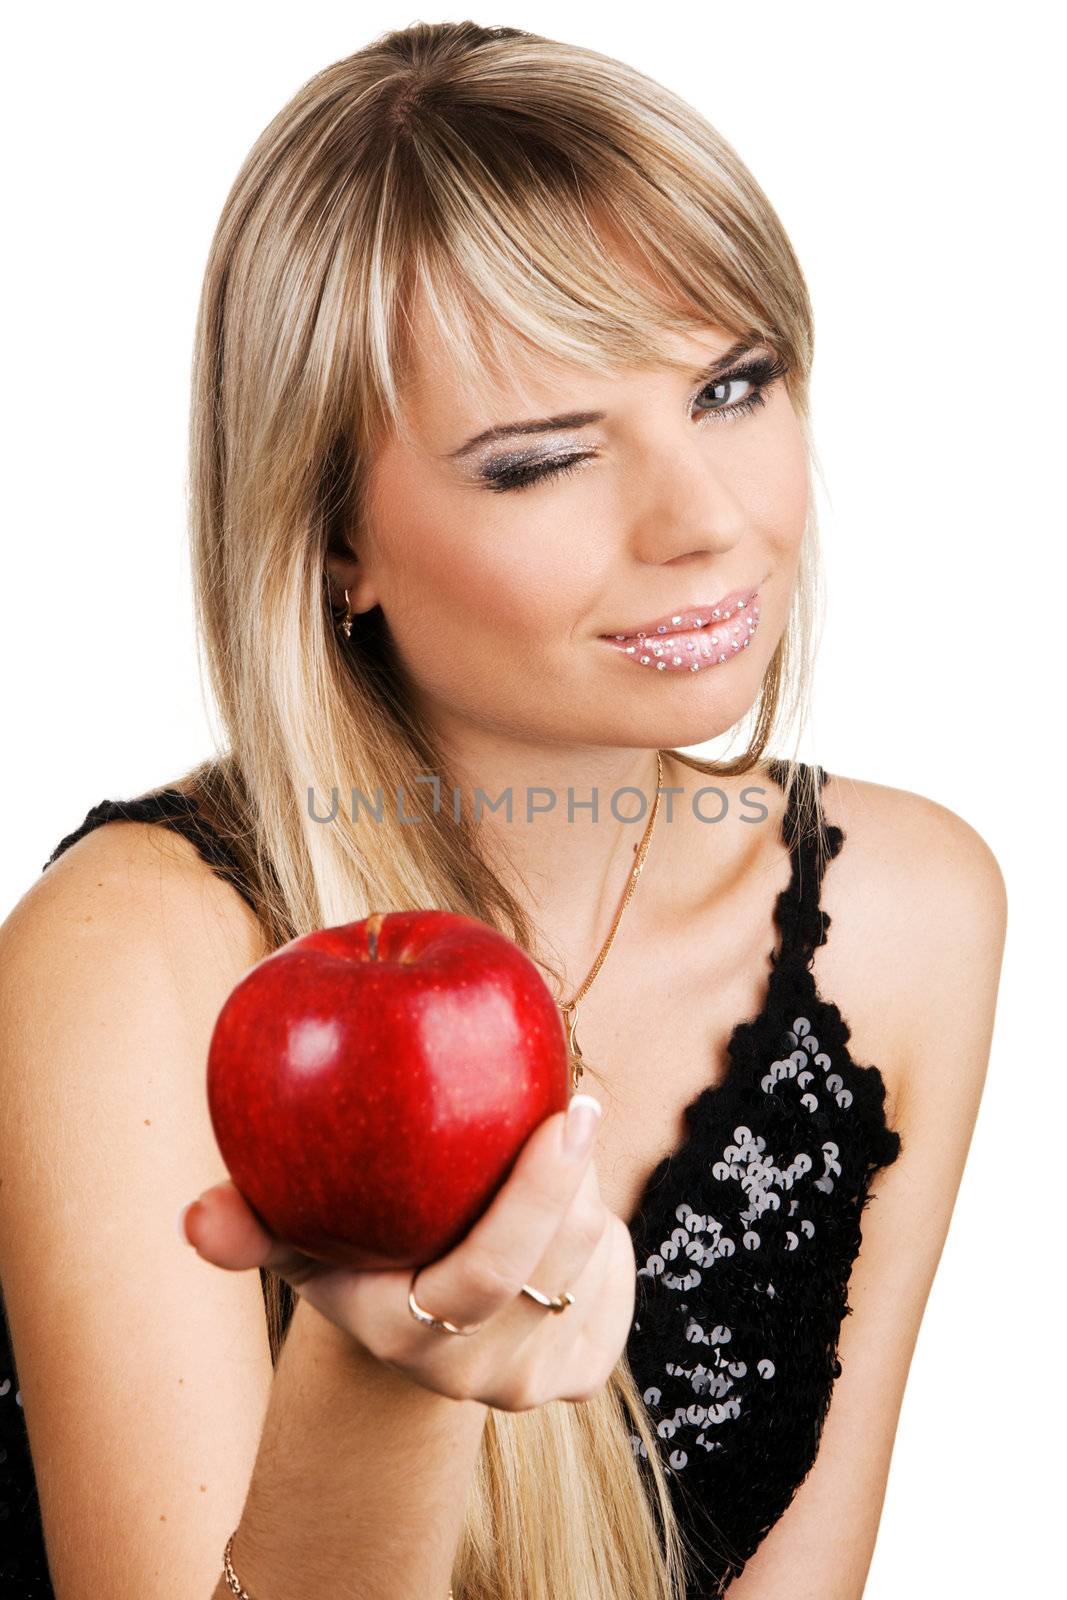 Beautiful young woman proposing a fresh red apple